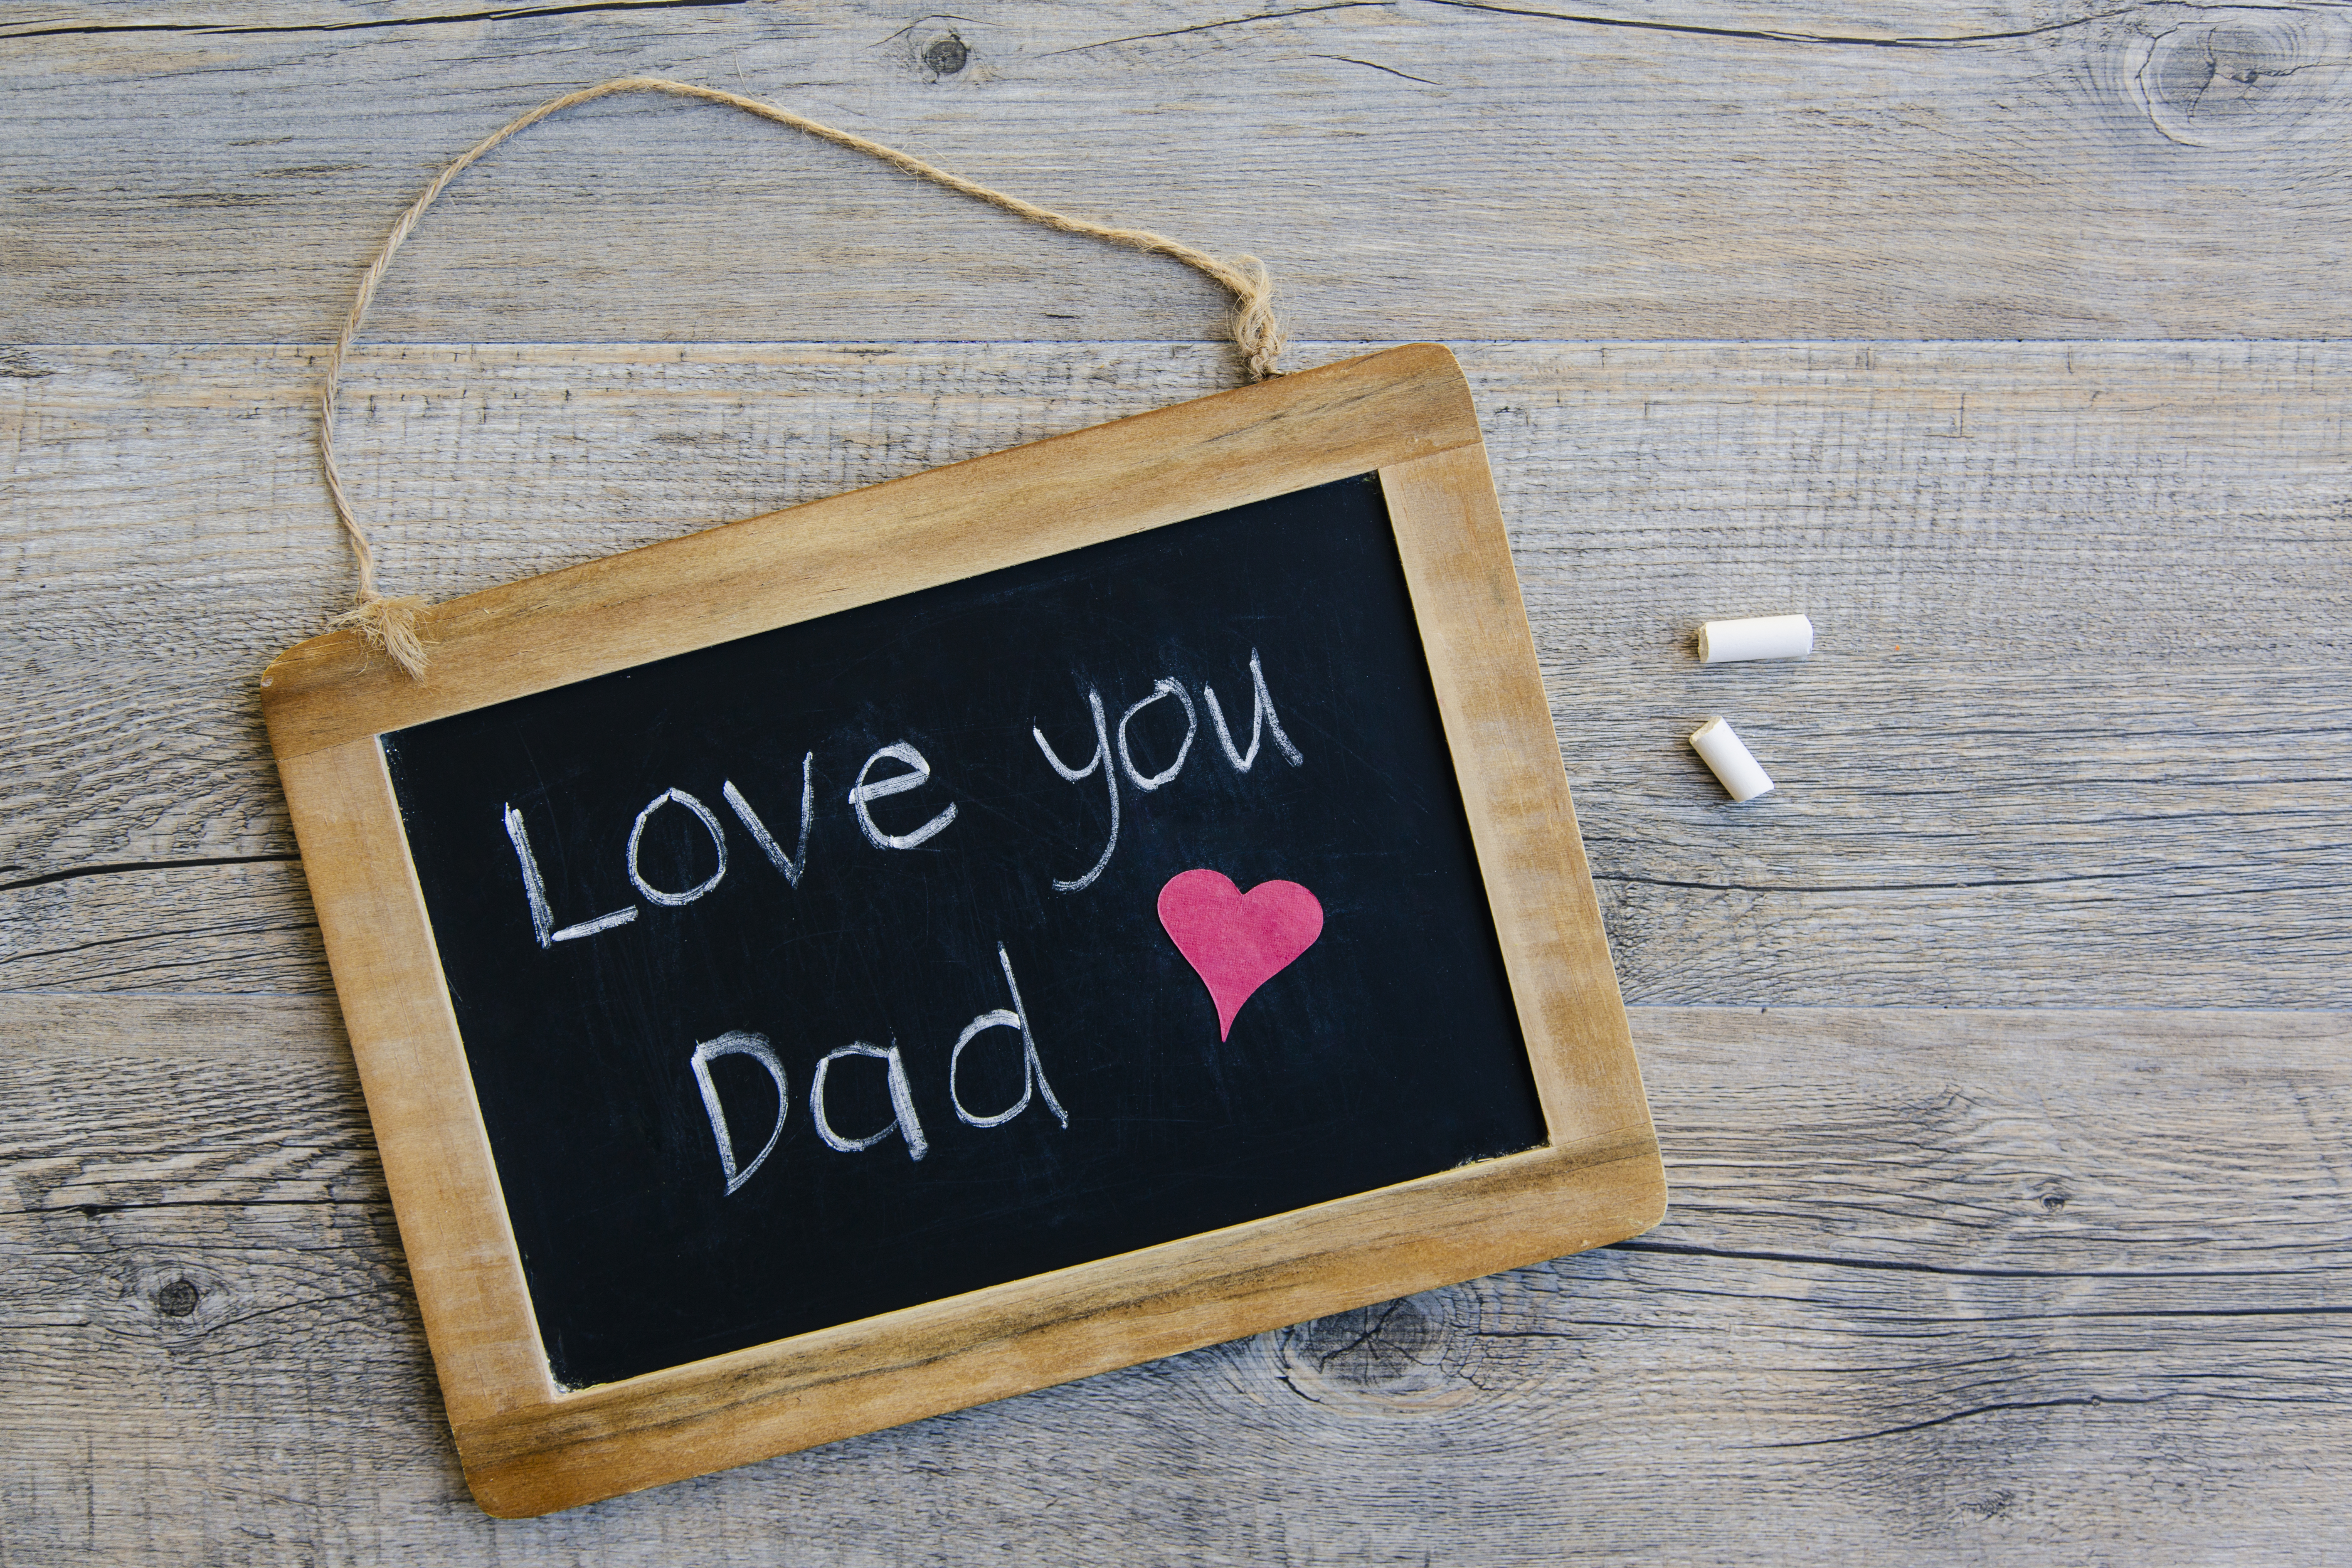 A message of 'love you Dad' on a blackboard written by a child for Father's Day.